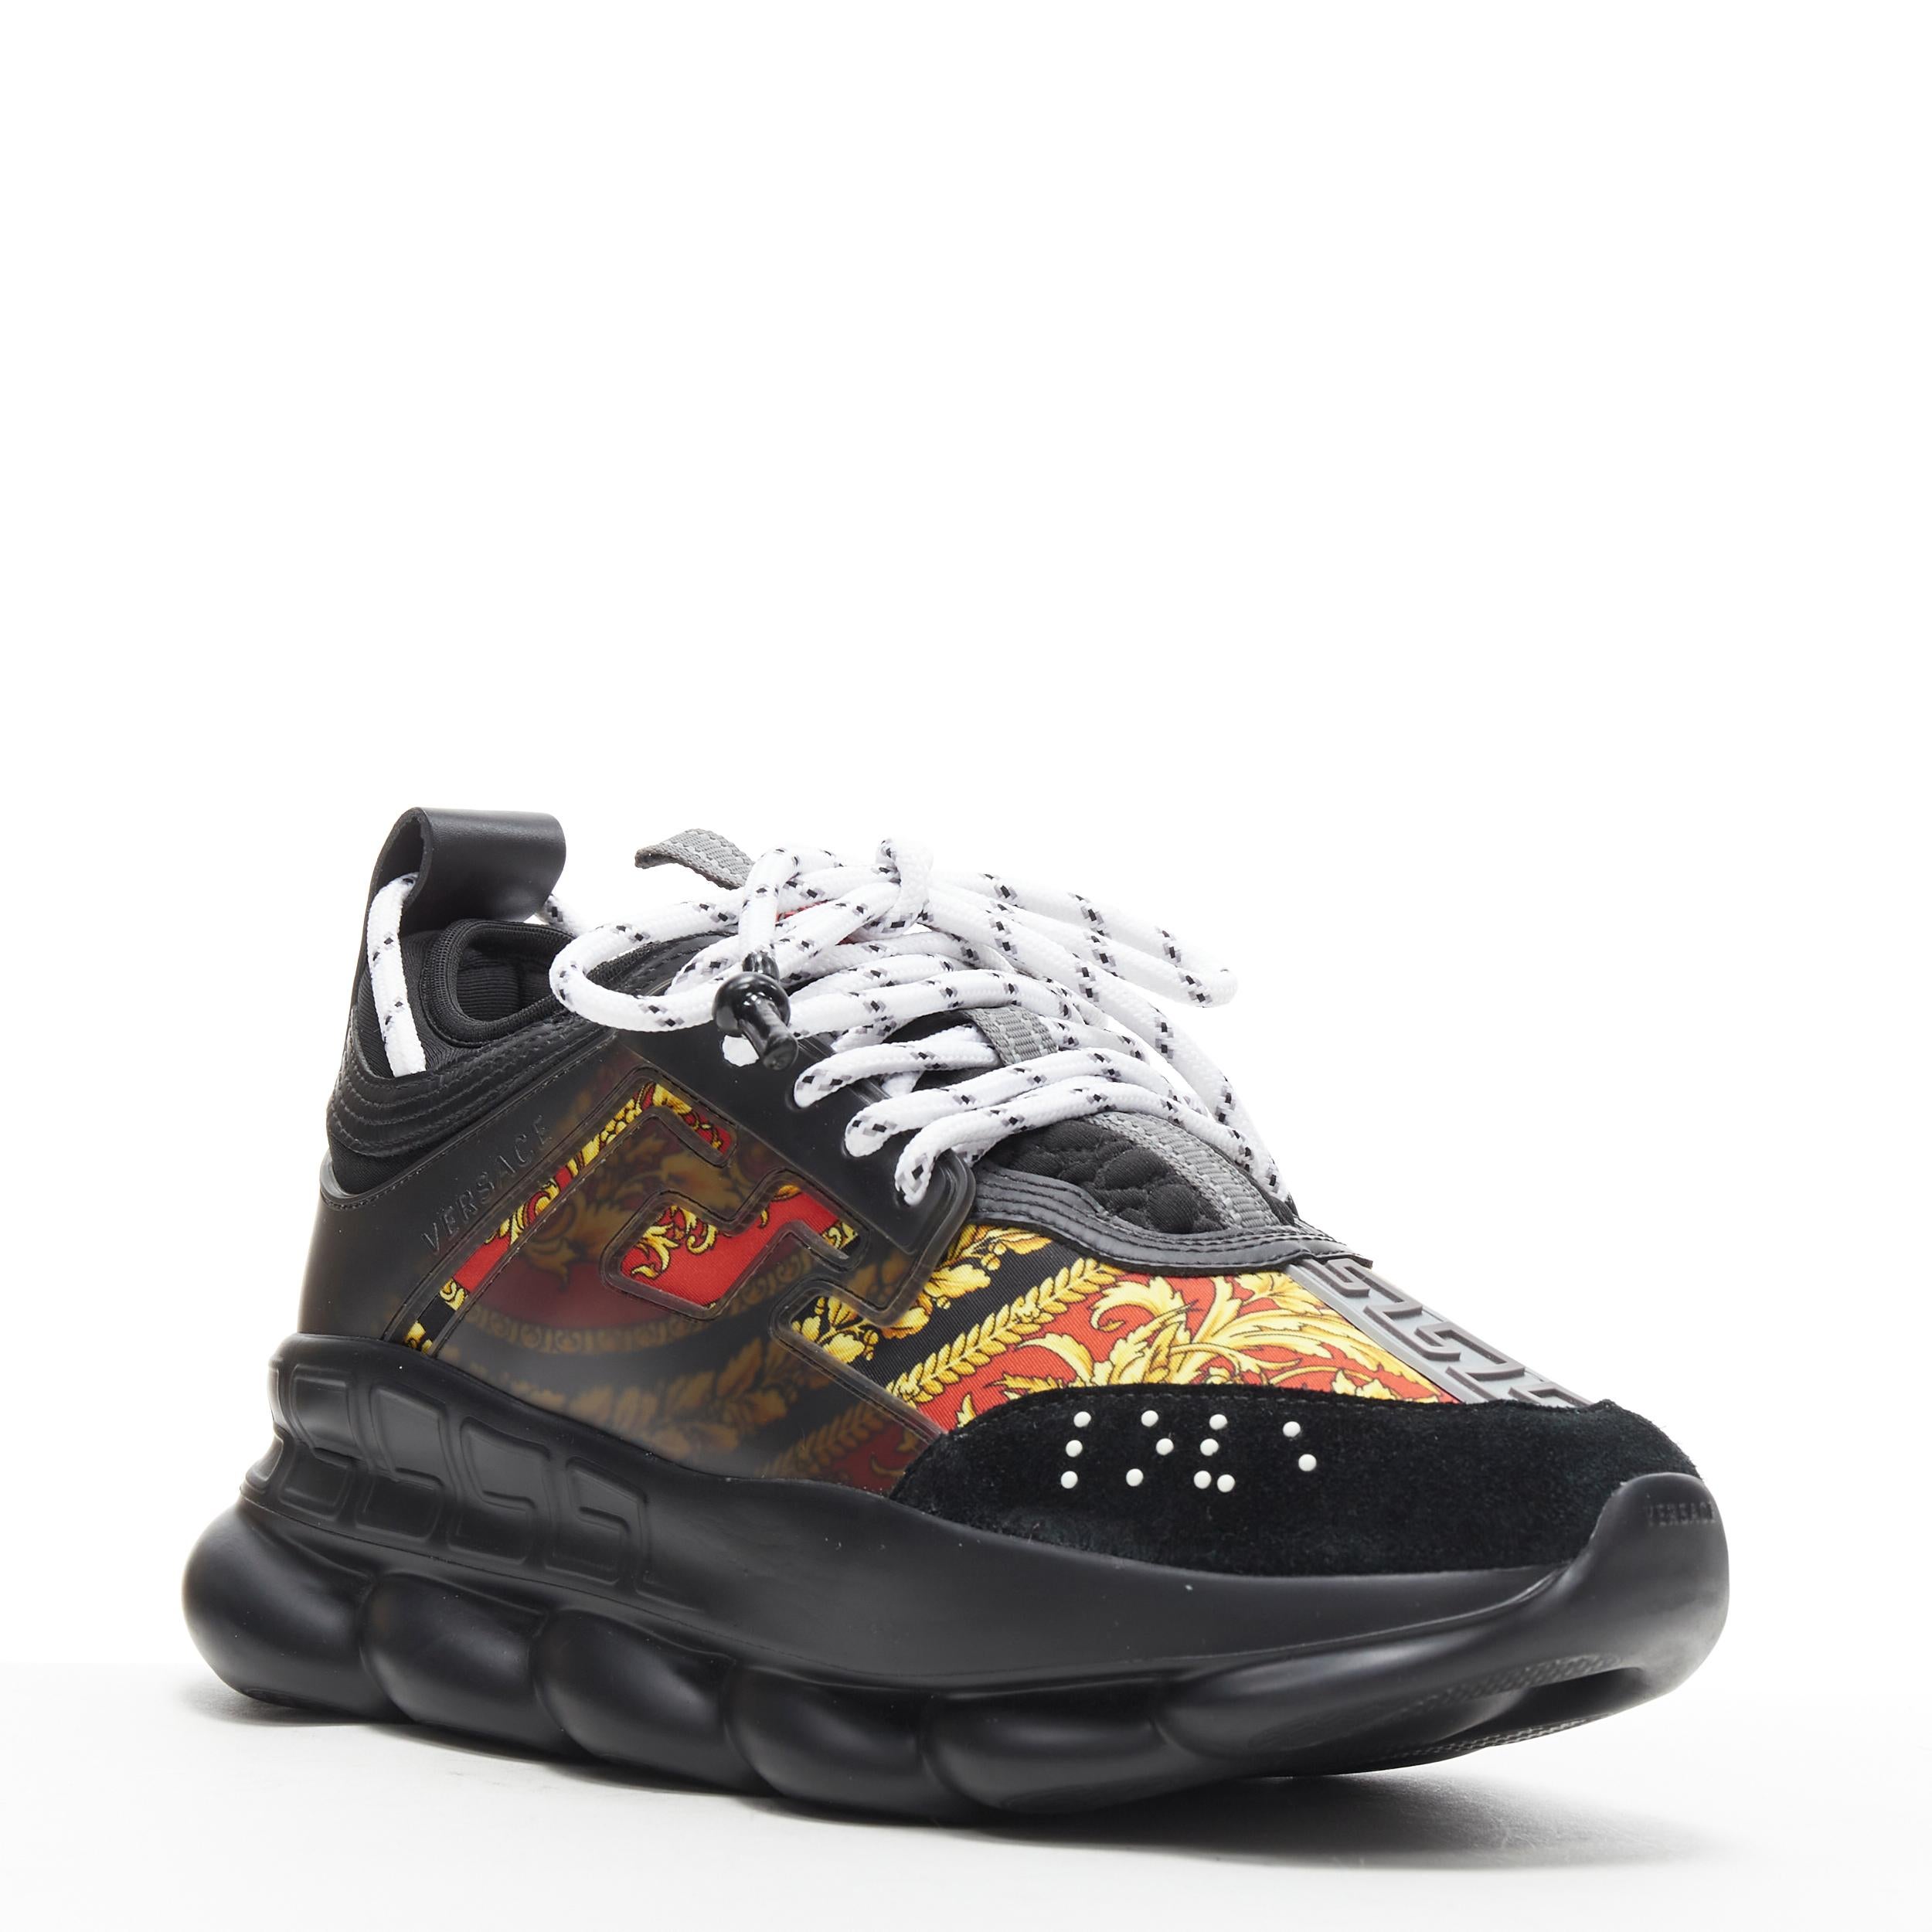 new VERSACE Chain Reaction black red barocco twill low chunky sneaker EU41 US8 Reference: TGAS/B00763 
Brand: Versace 
Designer: Salehe Bembury 
Model: Chain Reaction Black Barocco 
Material: Leather 
Color: Black 
Pattern: Floral 
Closure: Lace up